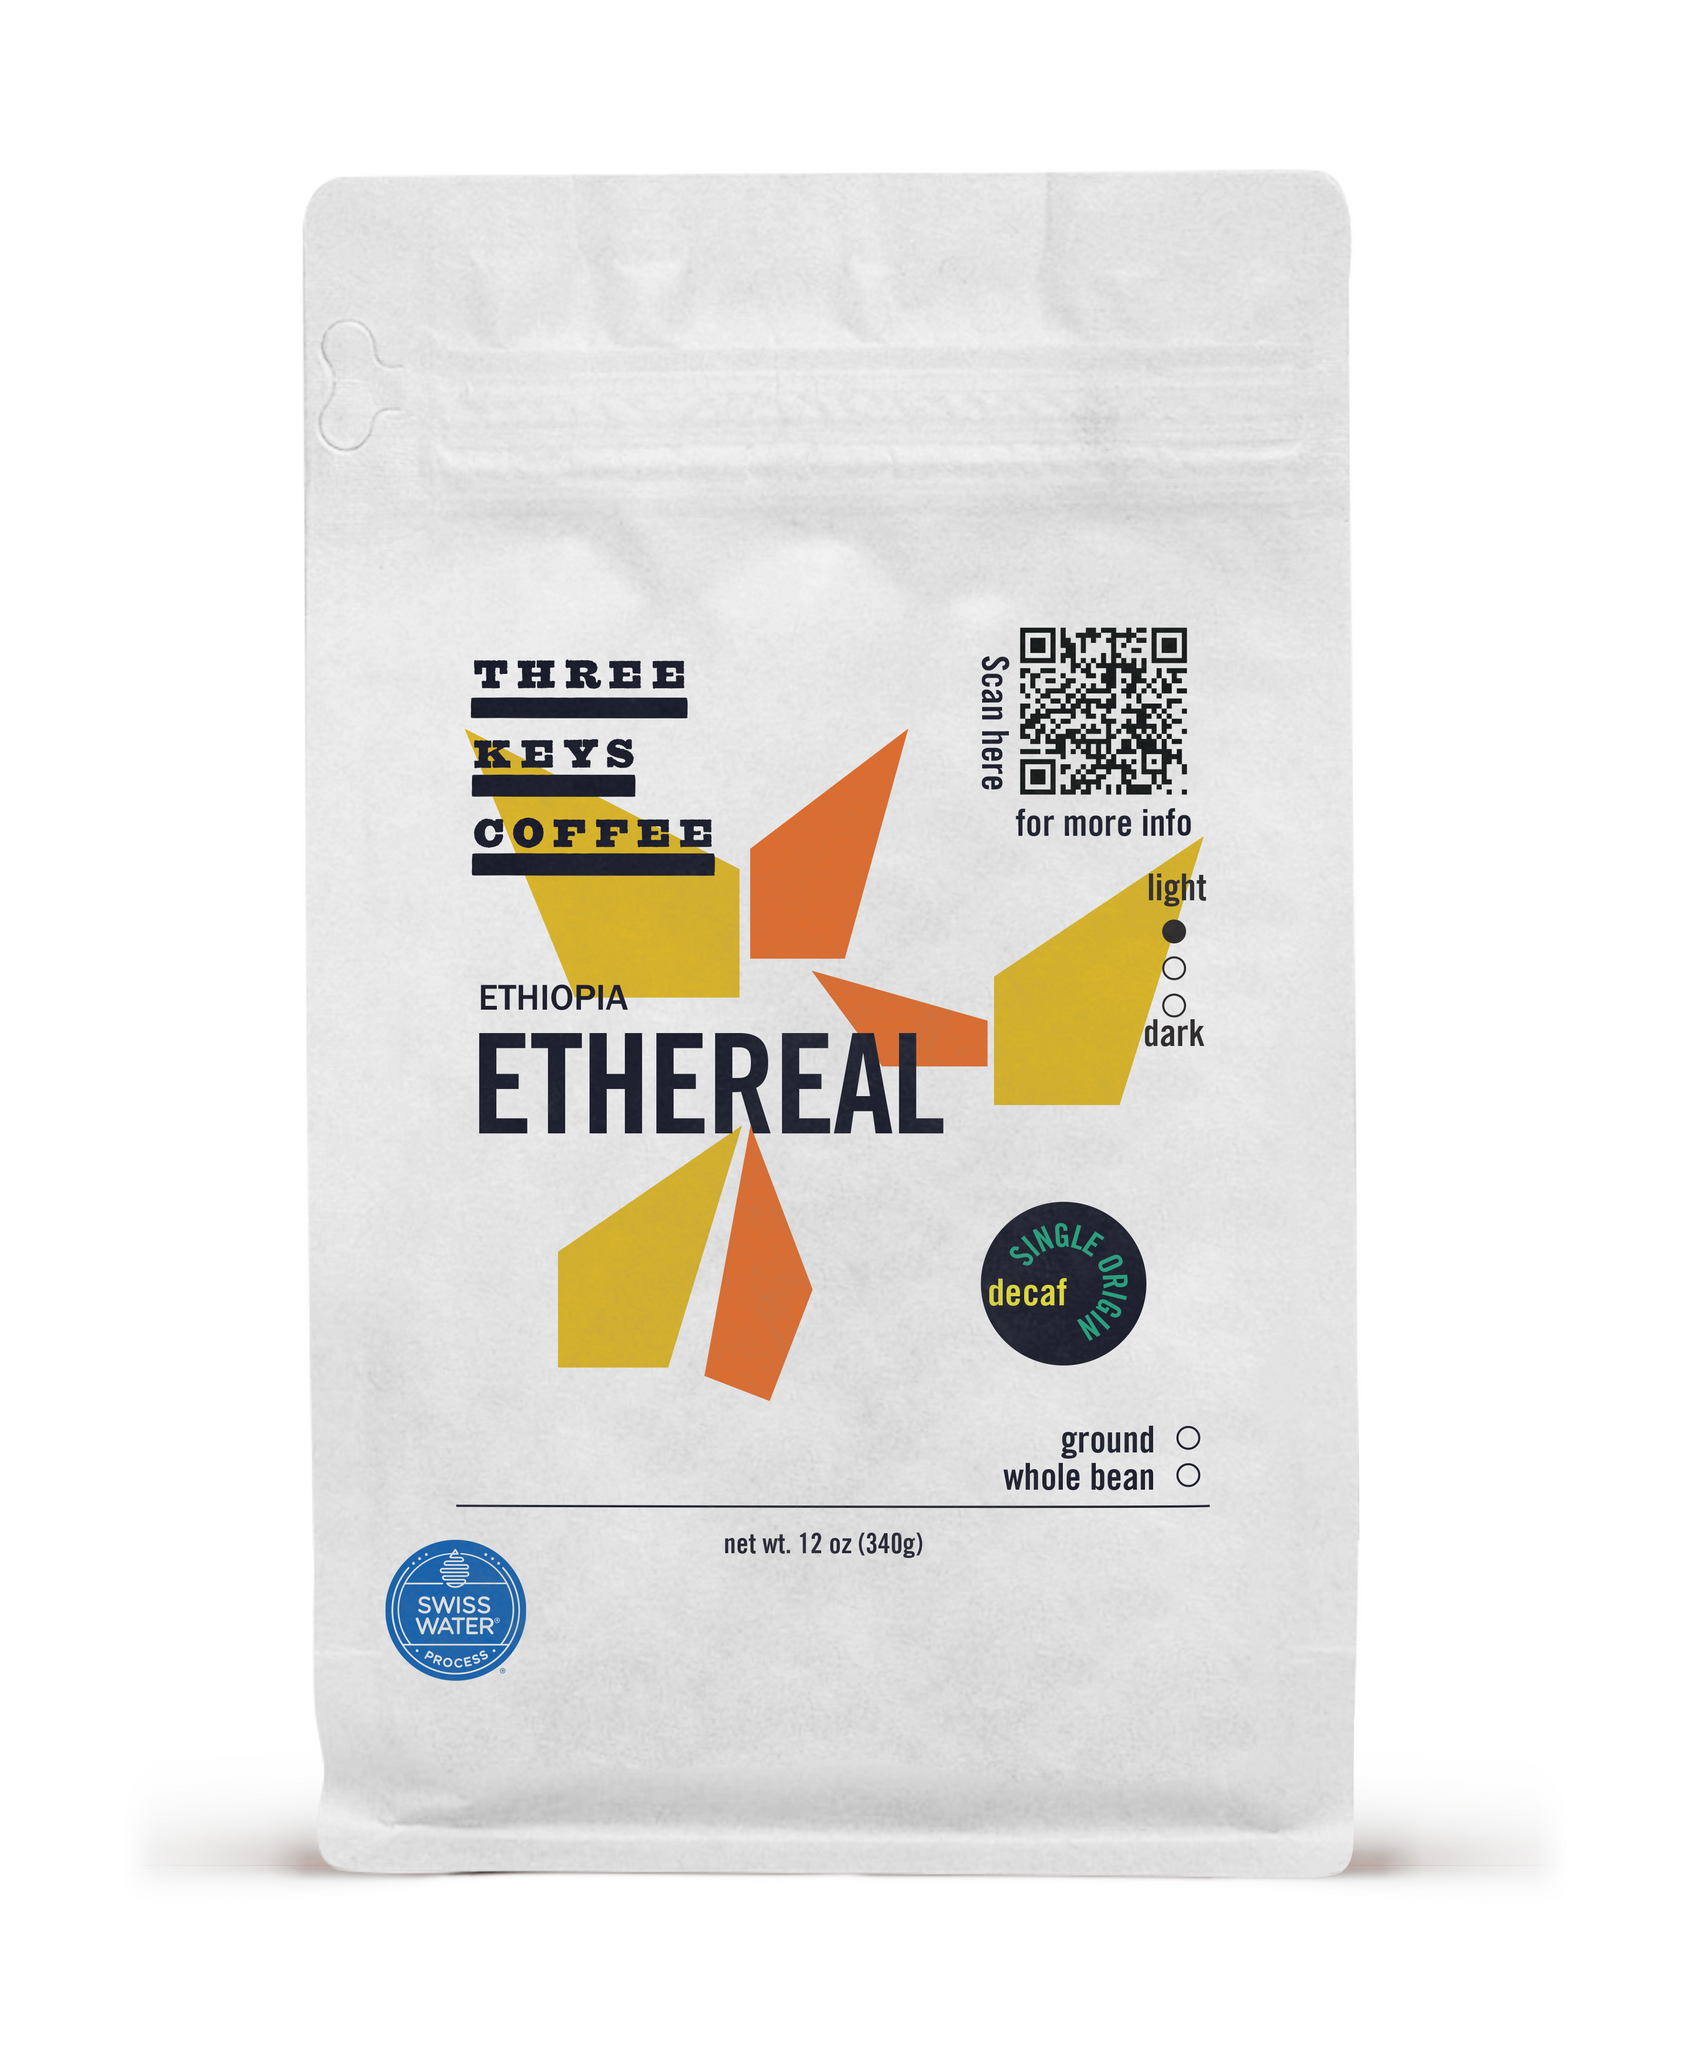 Ethiopia Ethereal - Swiss Water Process DECAF